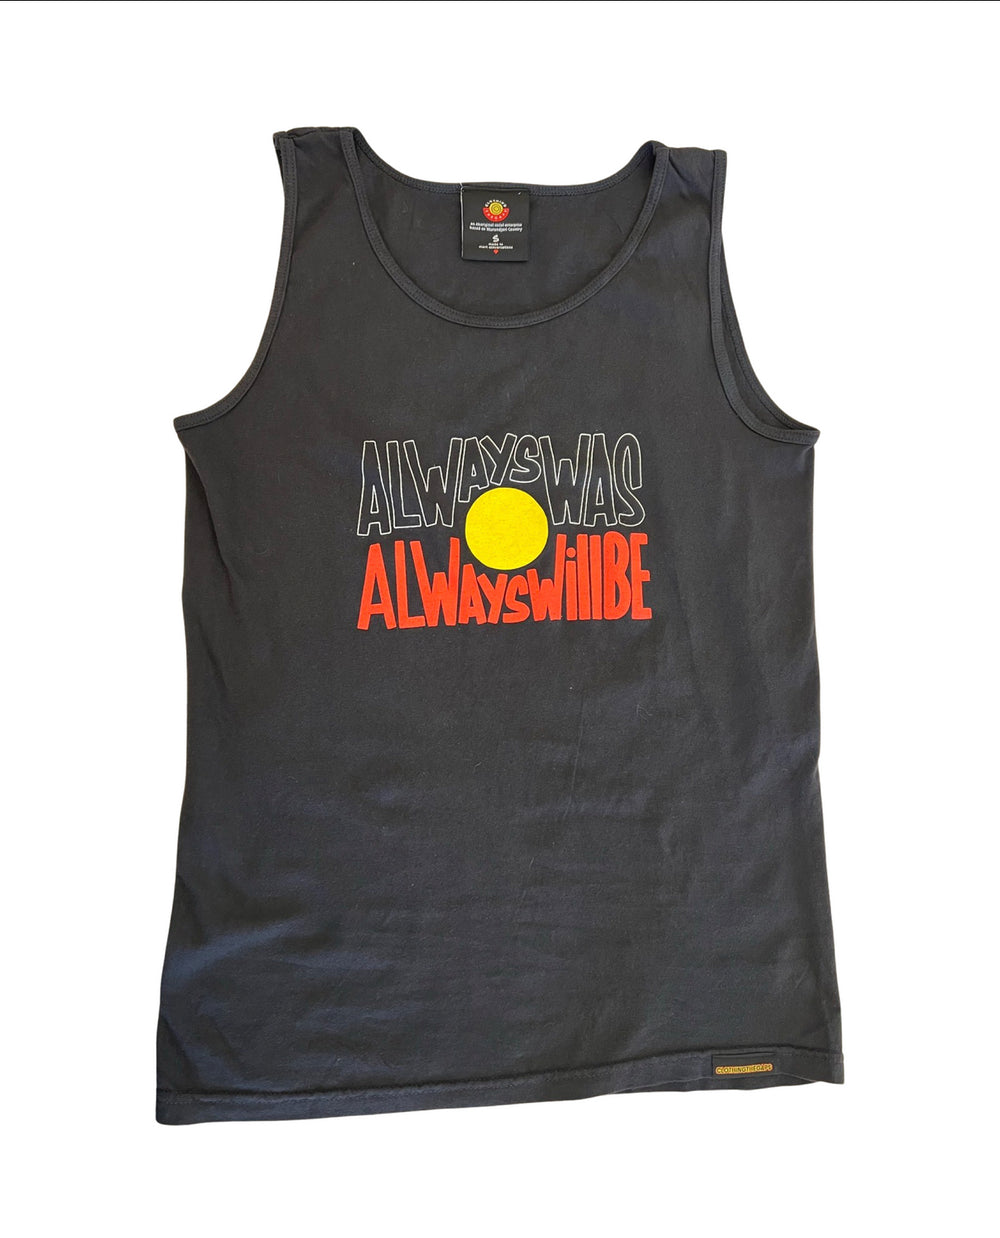 Clothing The Gaps. Chillin' 'Always Was, Always Will Be' Singlet. Vintage washed black singlet with Black, yellow and red 'always was always will be' text screen printed in centre.